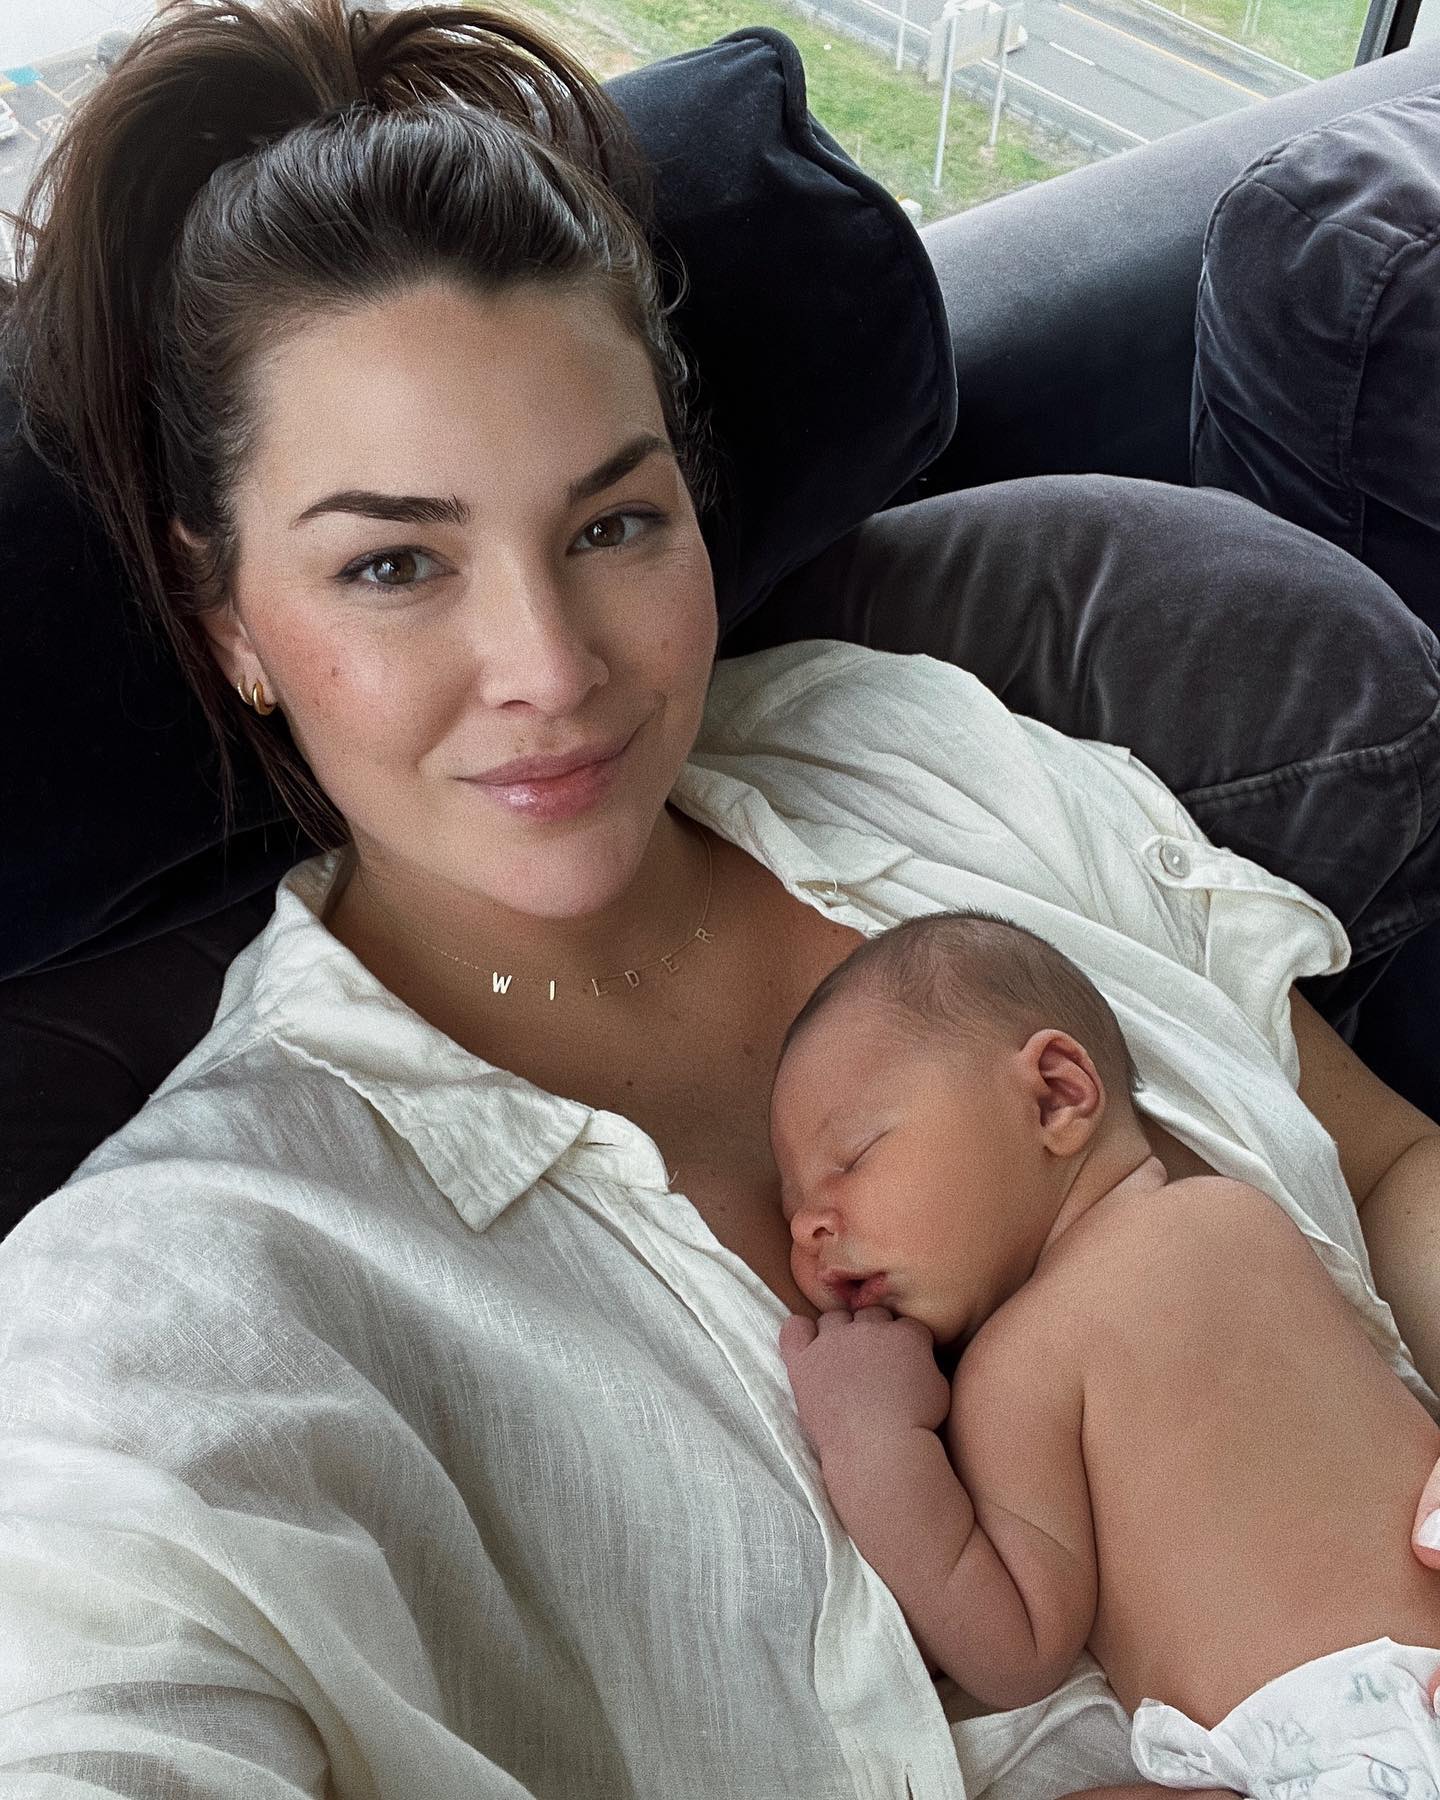 See BiP’s Jen Saviano and More Celebrity Moms Pumping Breast Milk Promo